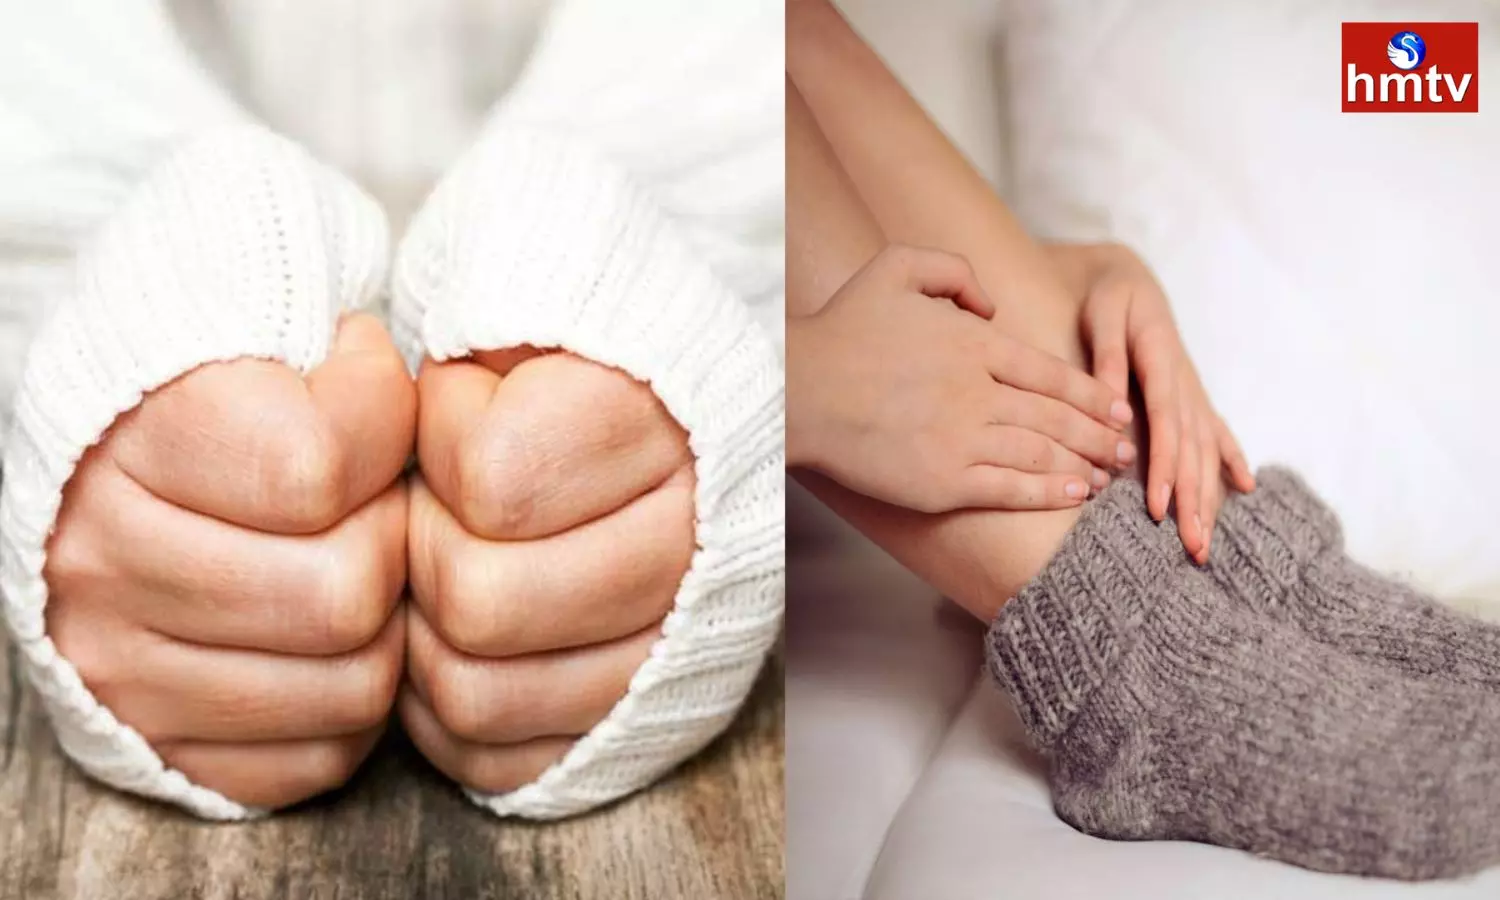 Follow these tips to keep your feet and hands warm in winter